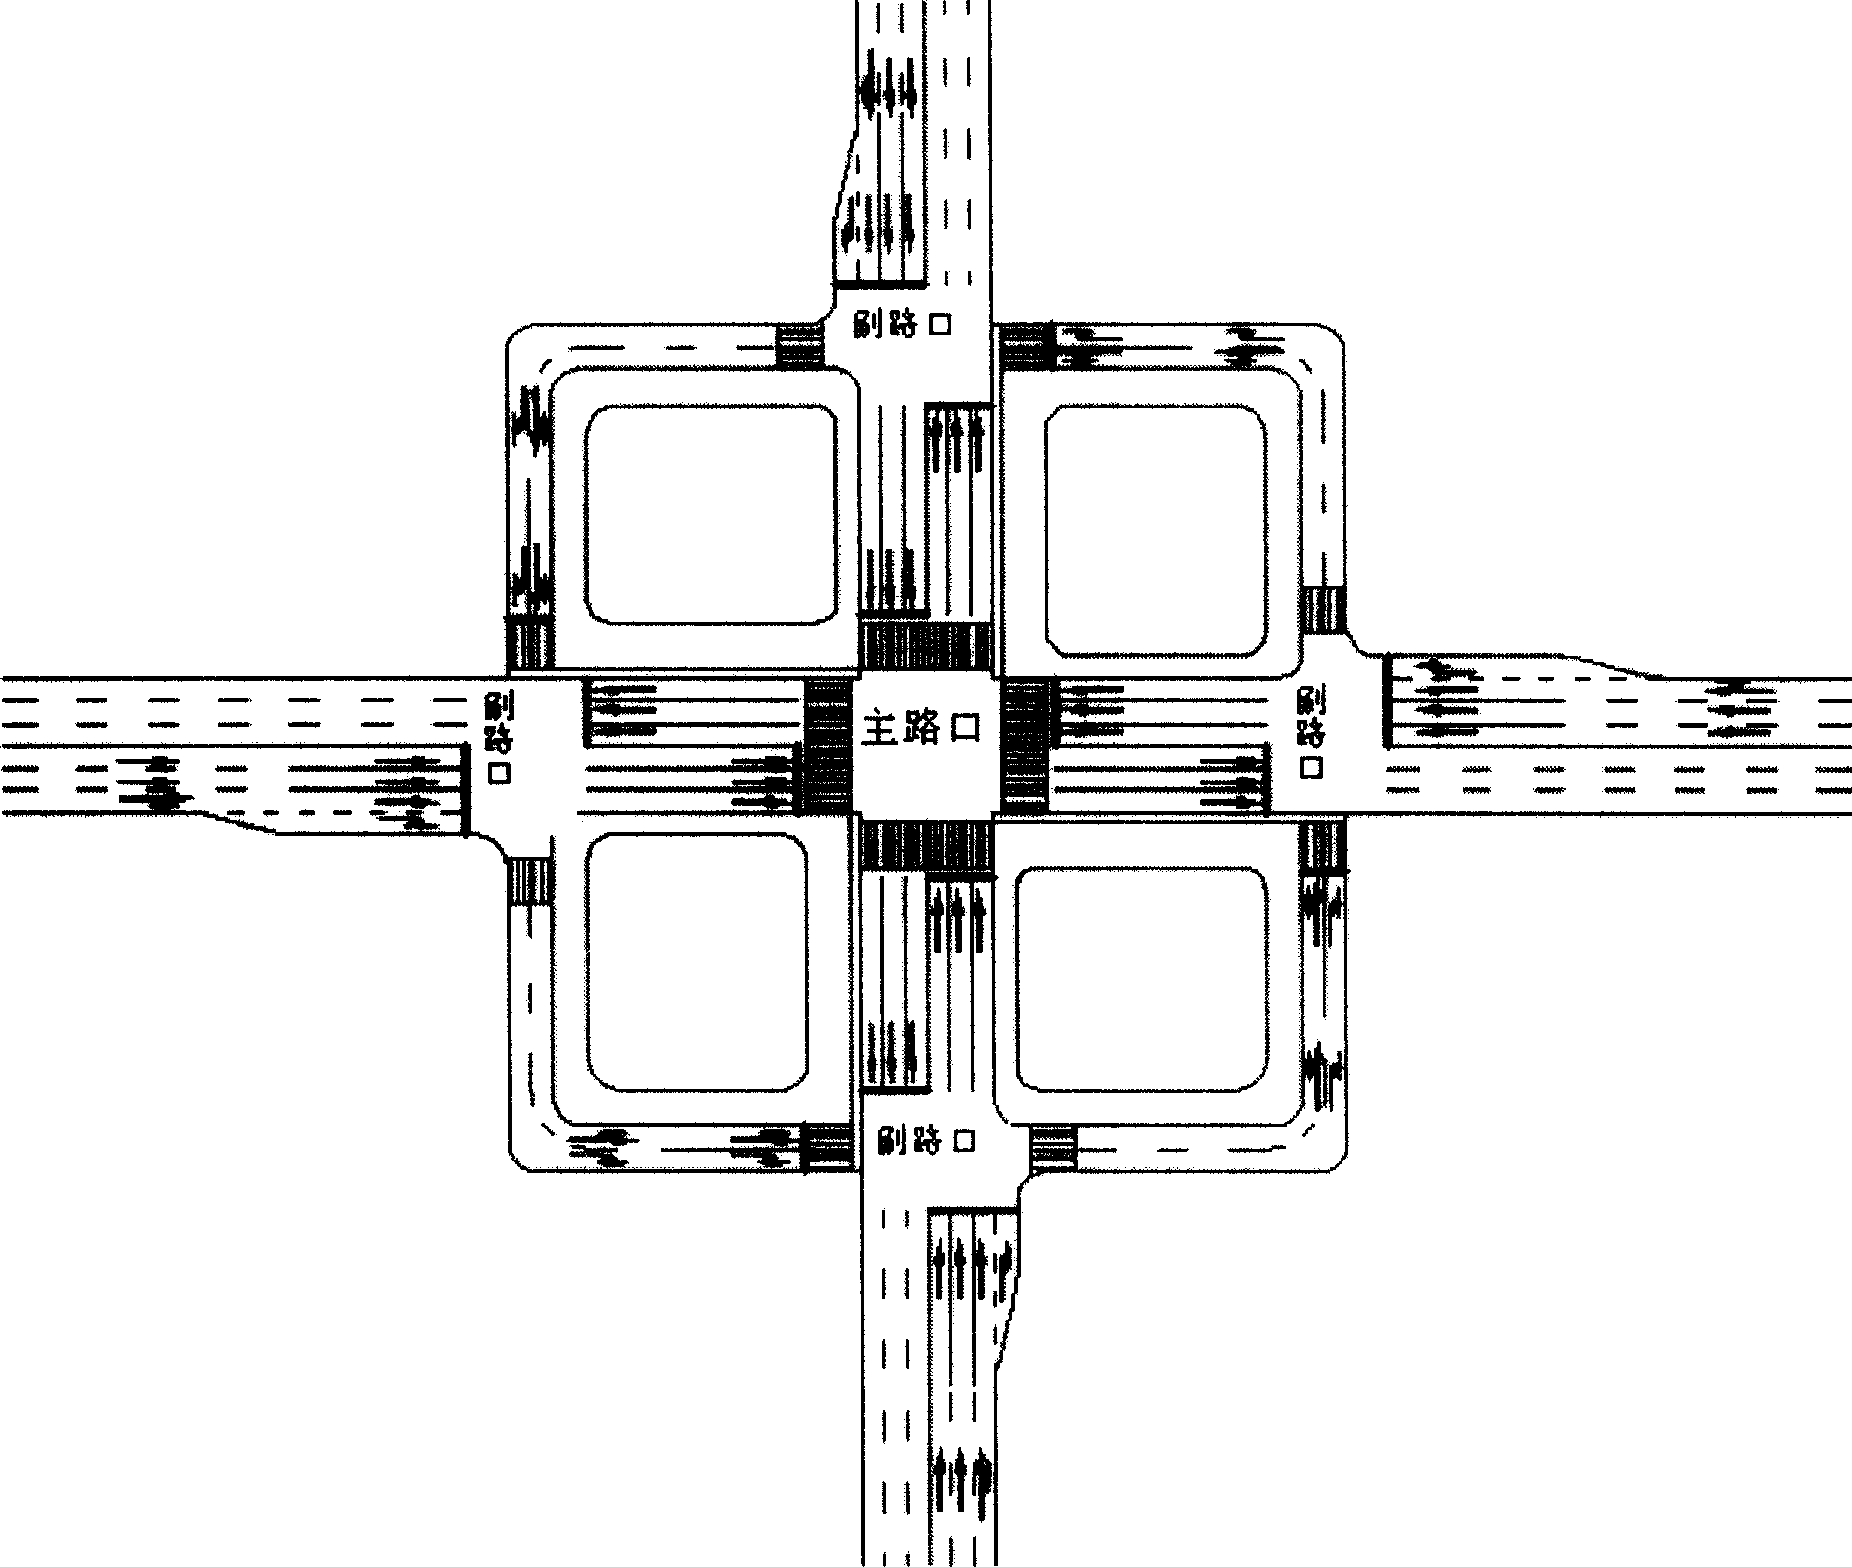 Novel traffic layout and control method for city road net and crossing